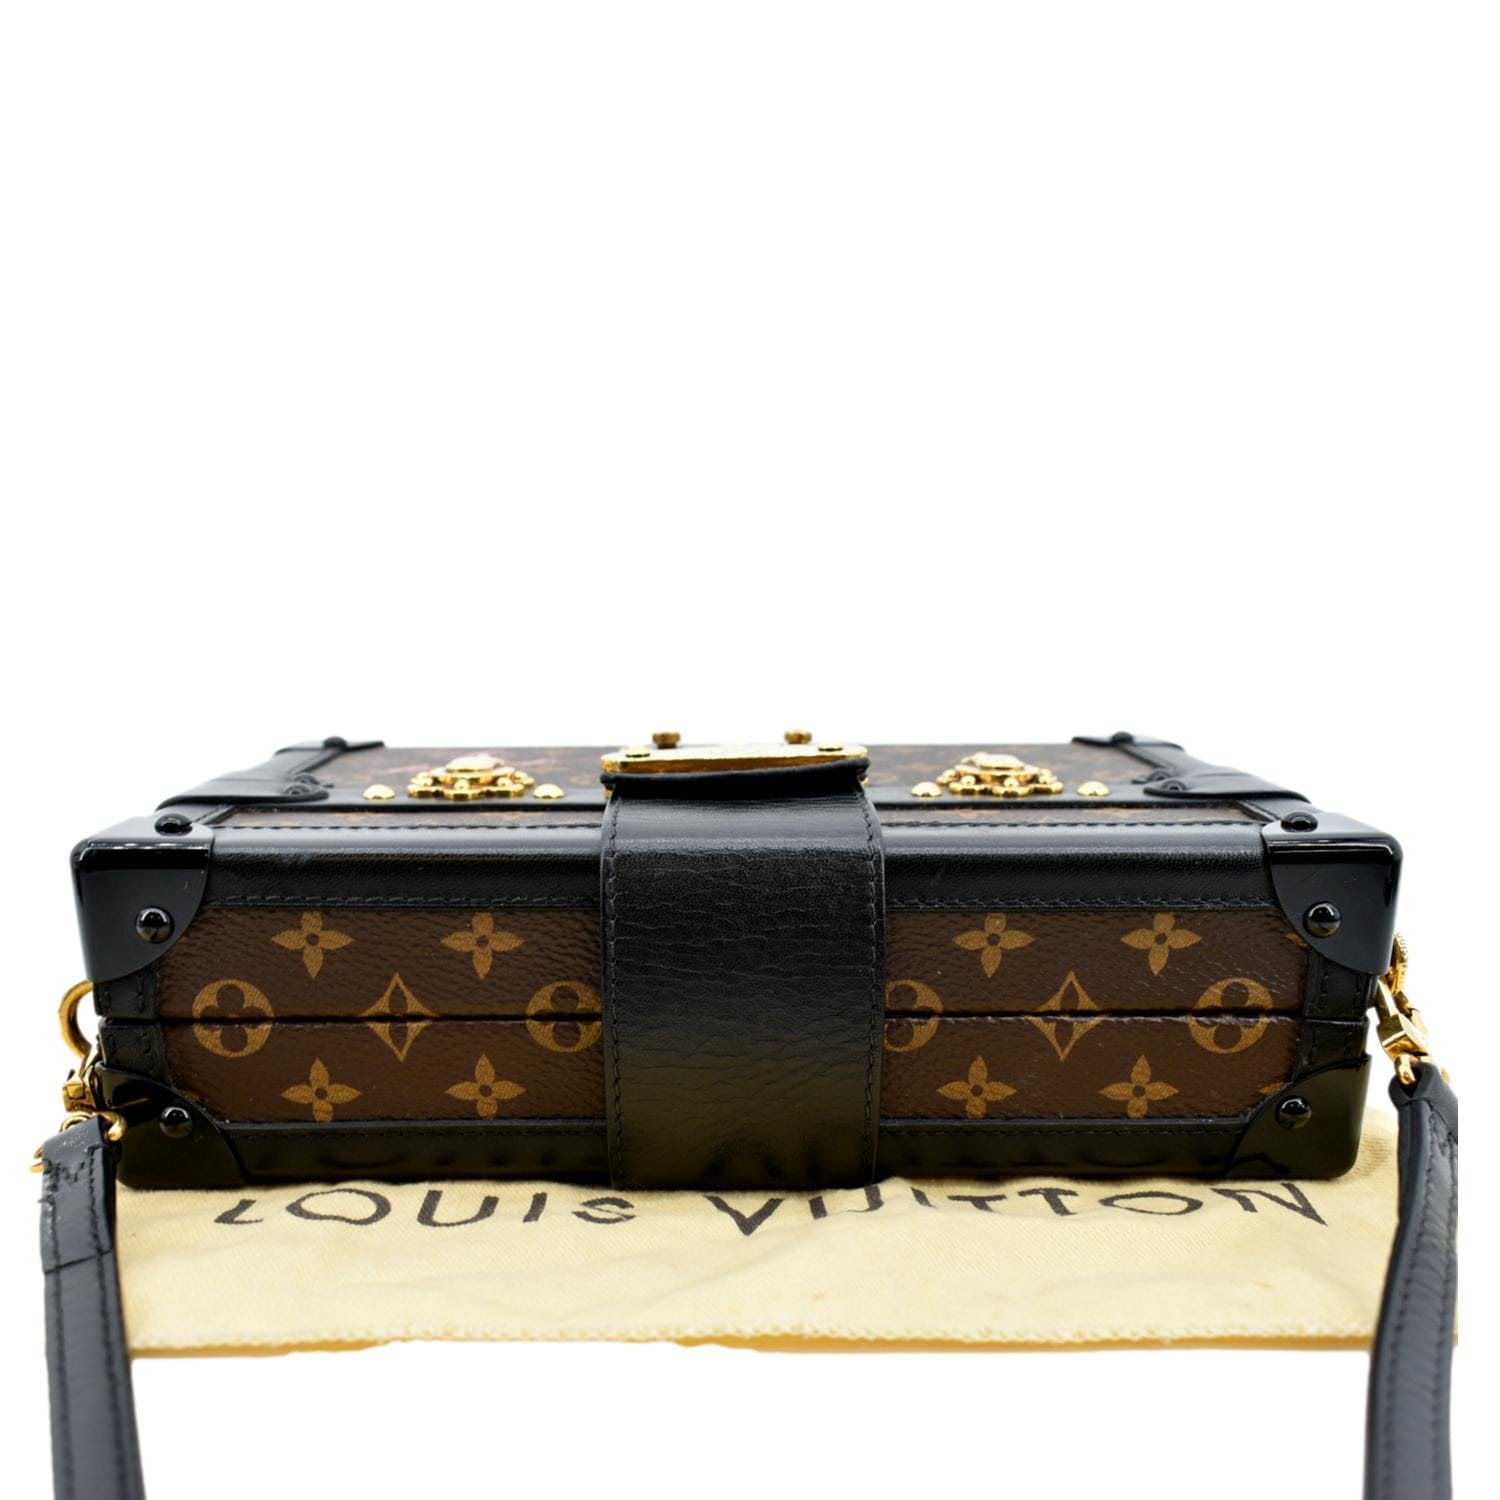 LV Clutch Box Bag Trunk 😍👍🏻 available in Monogram Eclipse